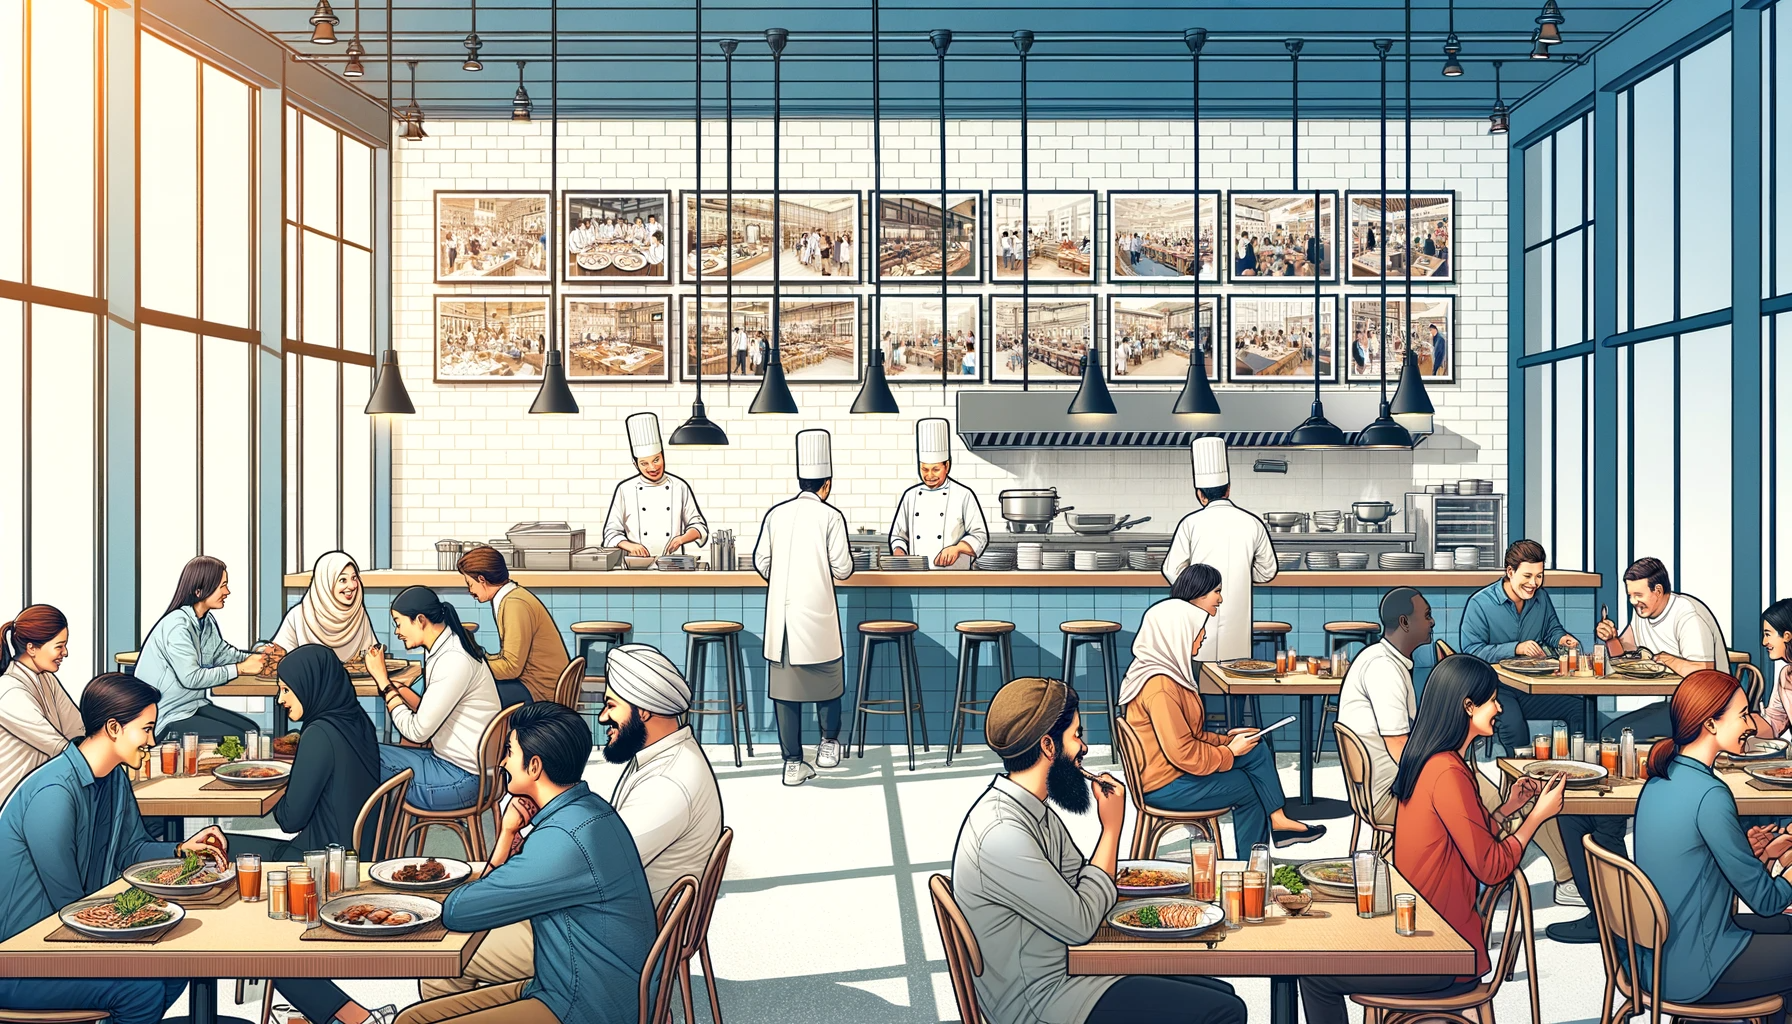 DALL·E 2023-11-02 01.46.34 - Illustration of a bustling new restaurant interior. Customers of various ethnicities are seated, enjoying their meals. In the open kitchen, chefs are 